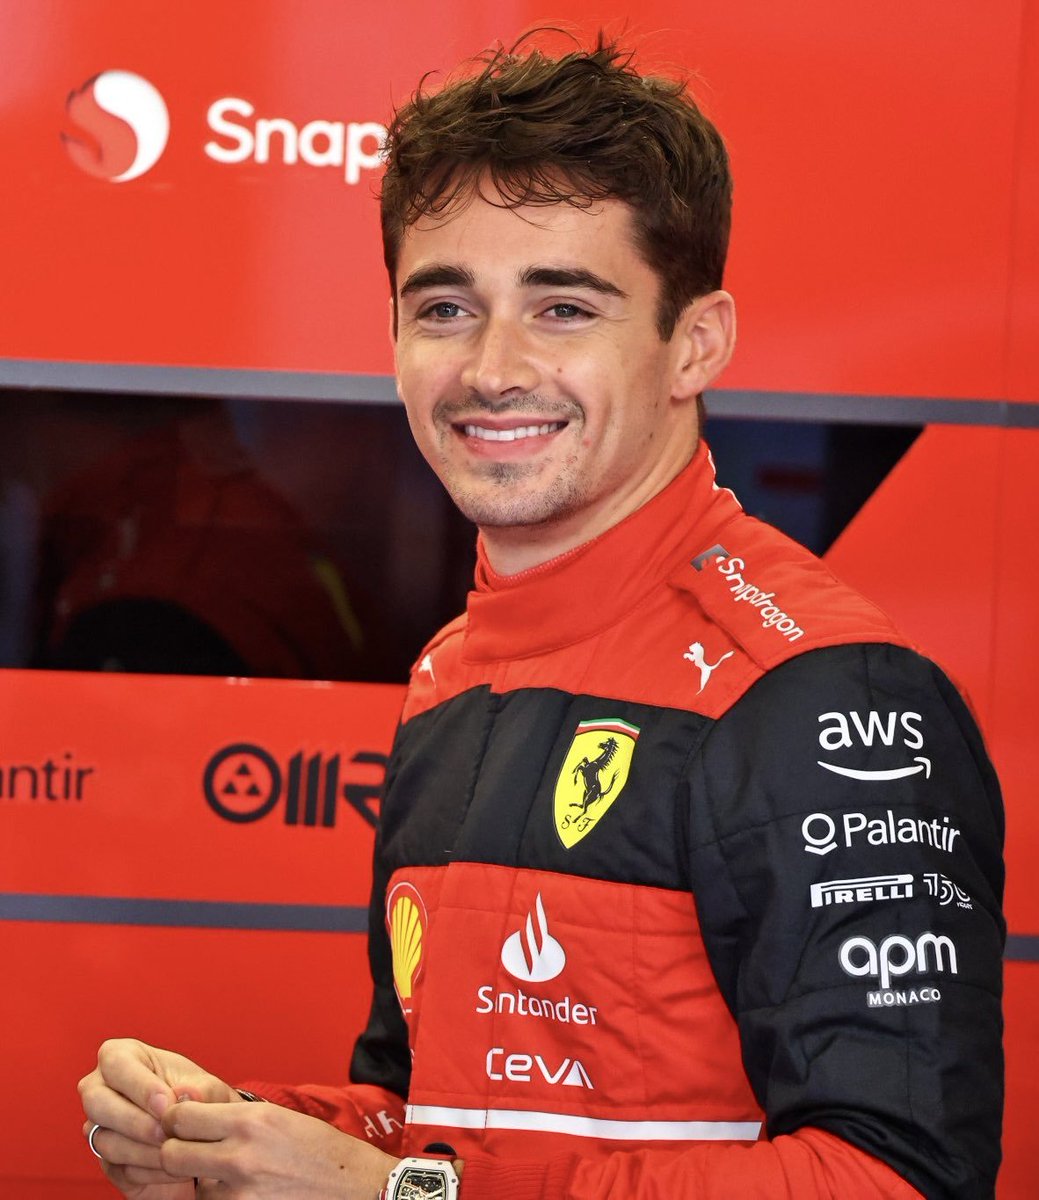 Charles Leclerc goes in to sprint qualifying with only 3 laps under his belt and puts it P2, just a tenth behind Verstappen.

Generational.